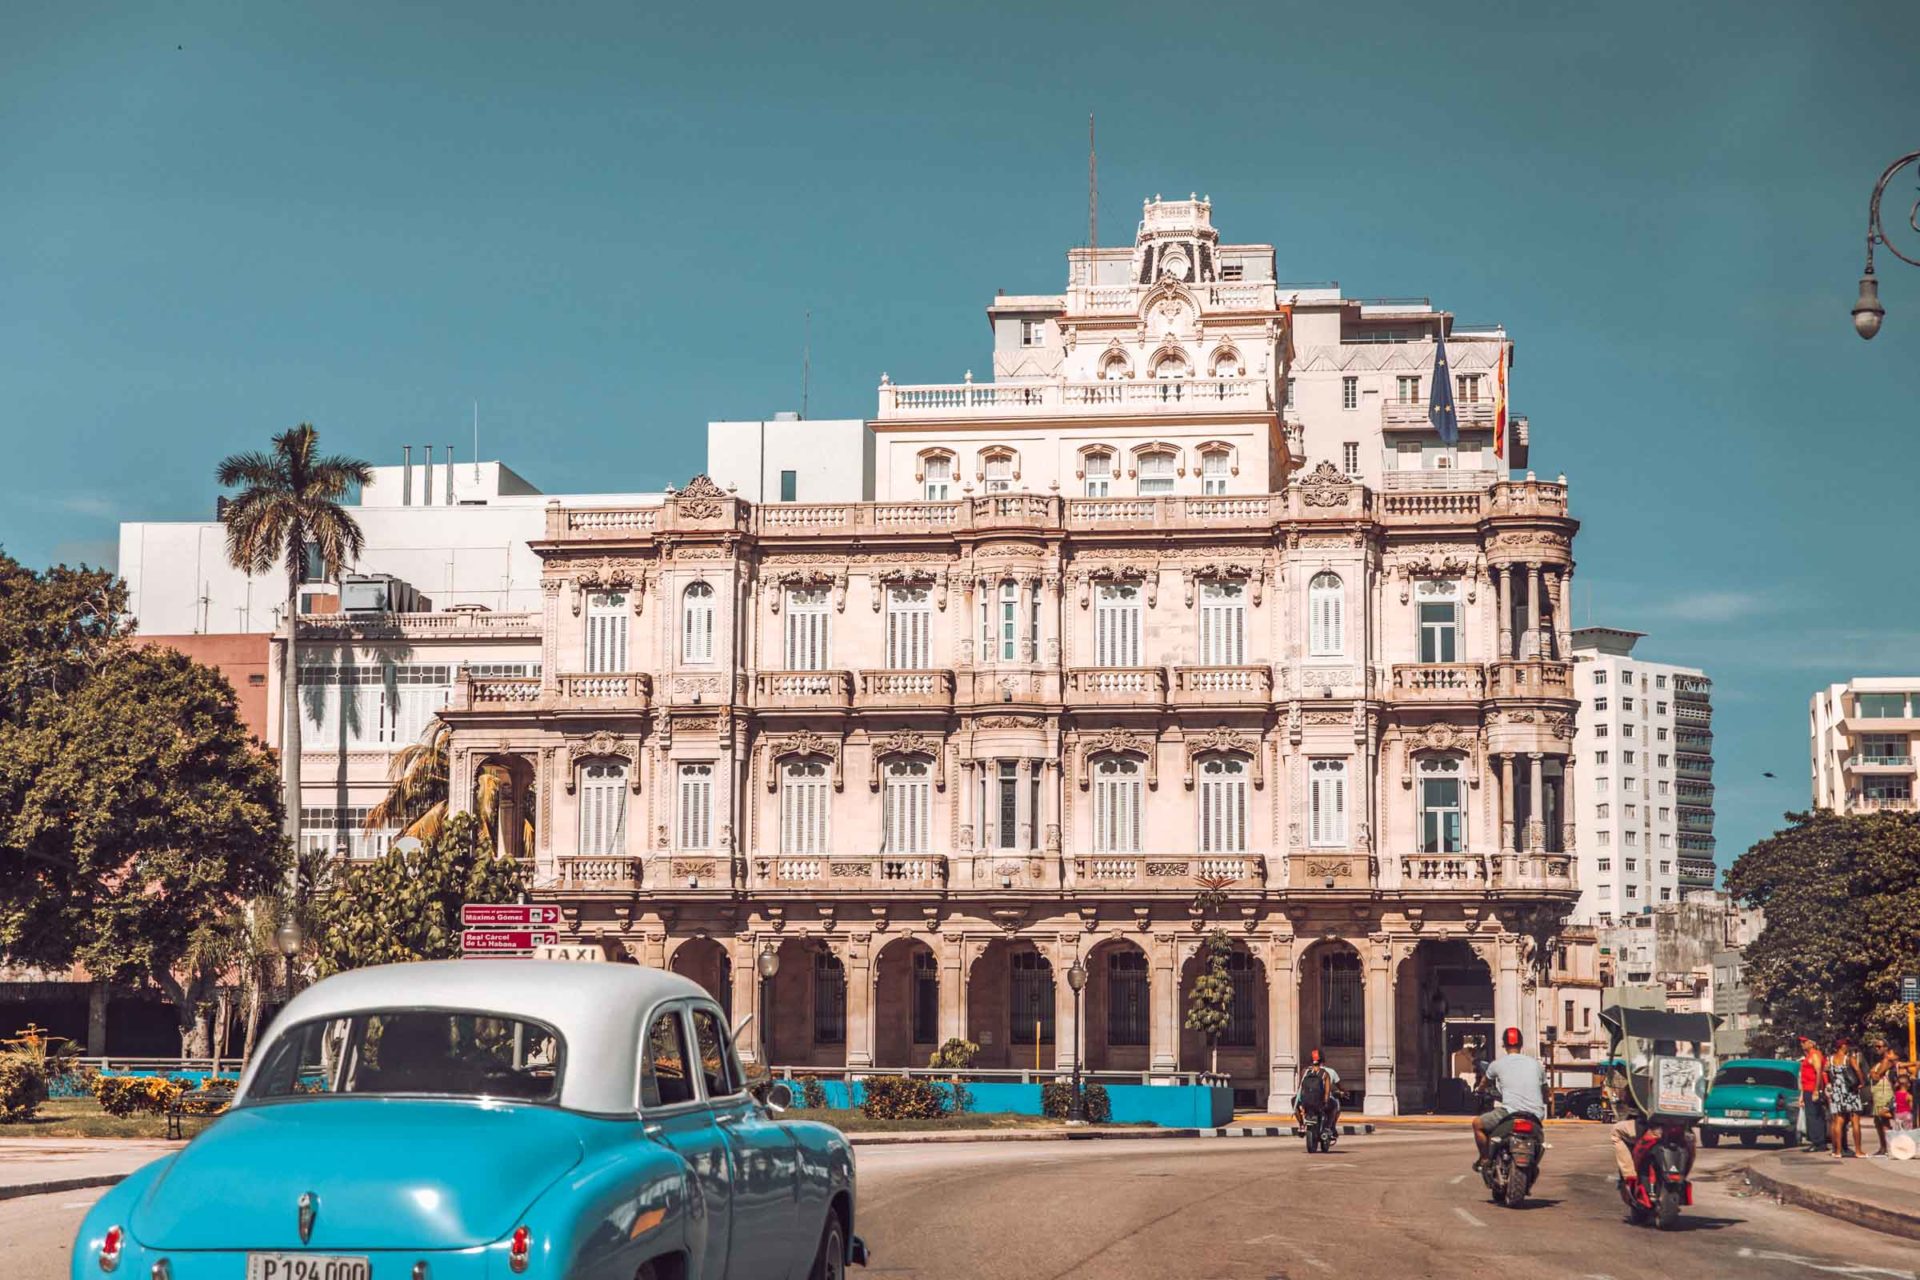 When Is The Best Time To Visit Cuba?